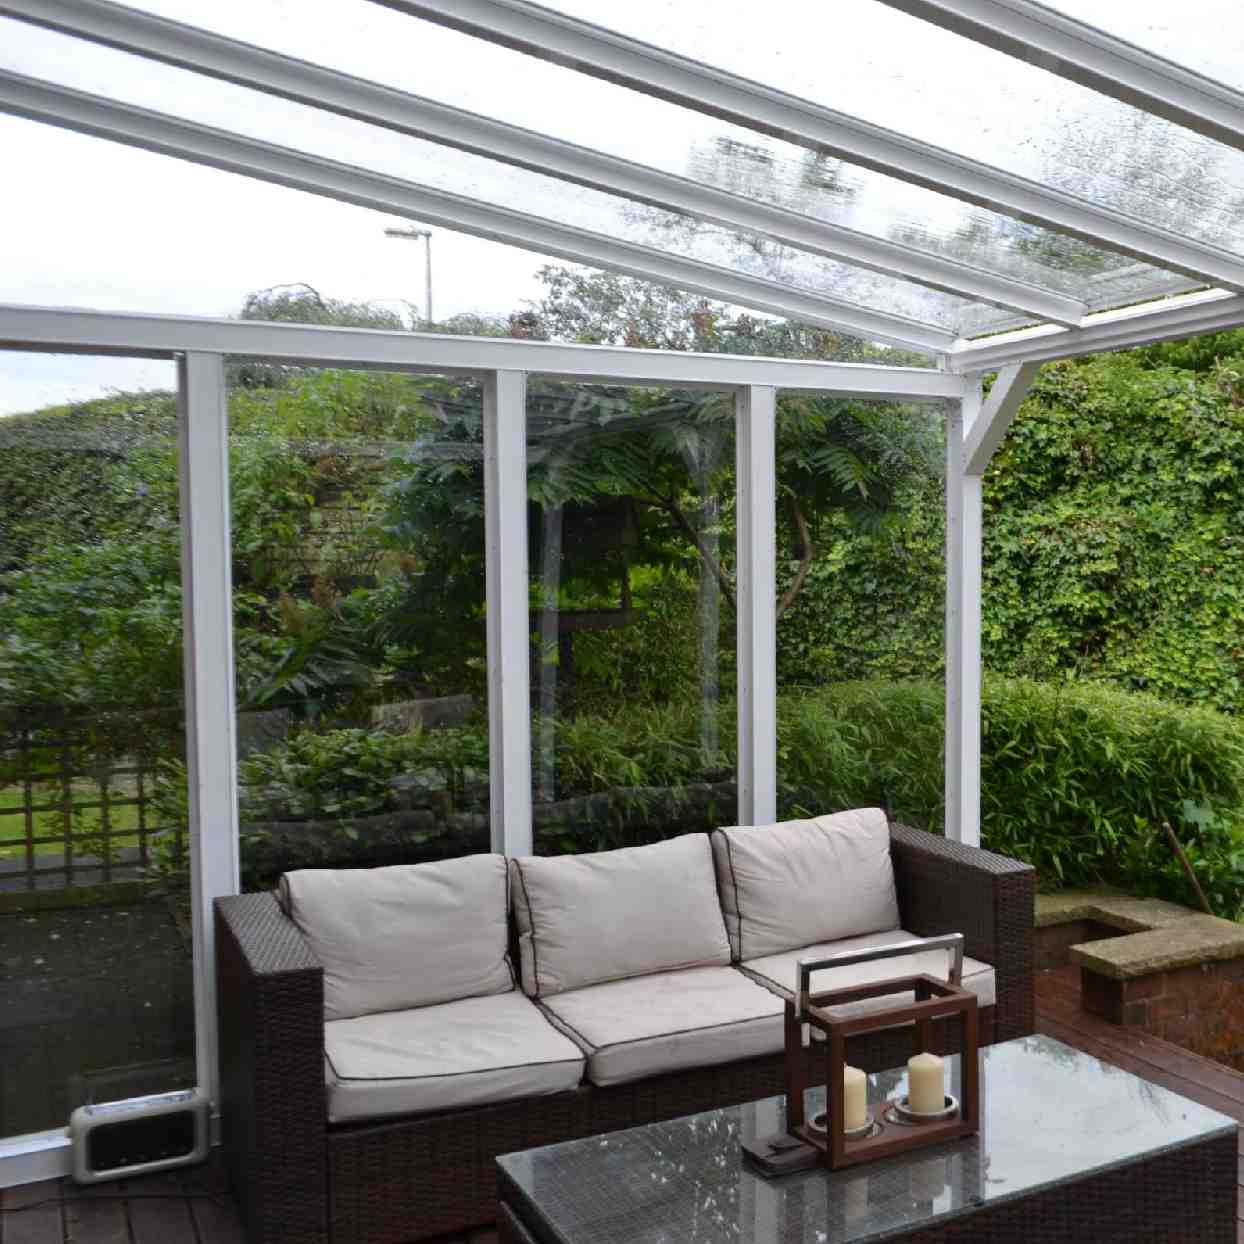 Buy Omega Verandah White with 6mm Glass Clear Plate Polycarbonate Glazing - 9.1m (W) x 1.5m (P), (5) Supporting Posts online today